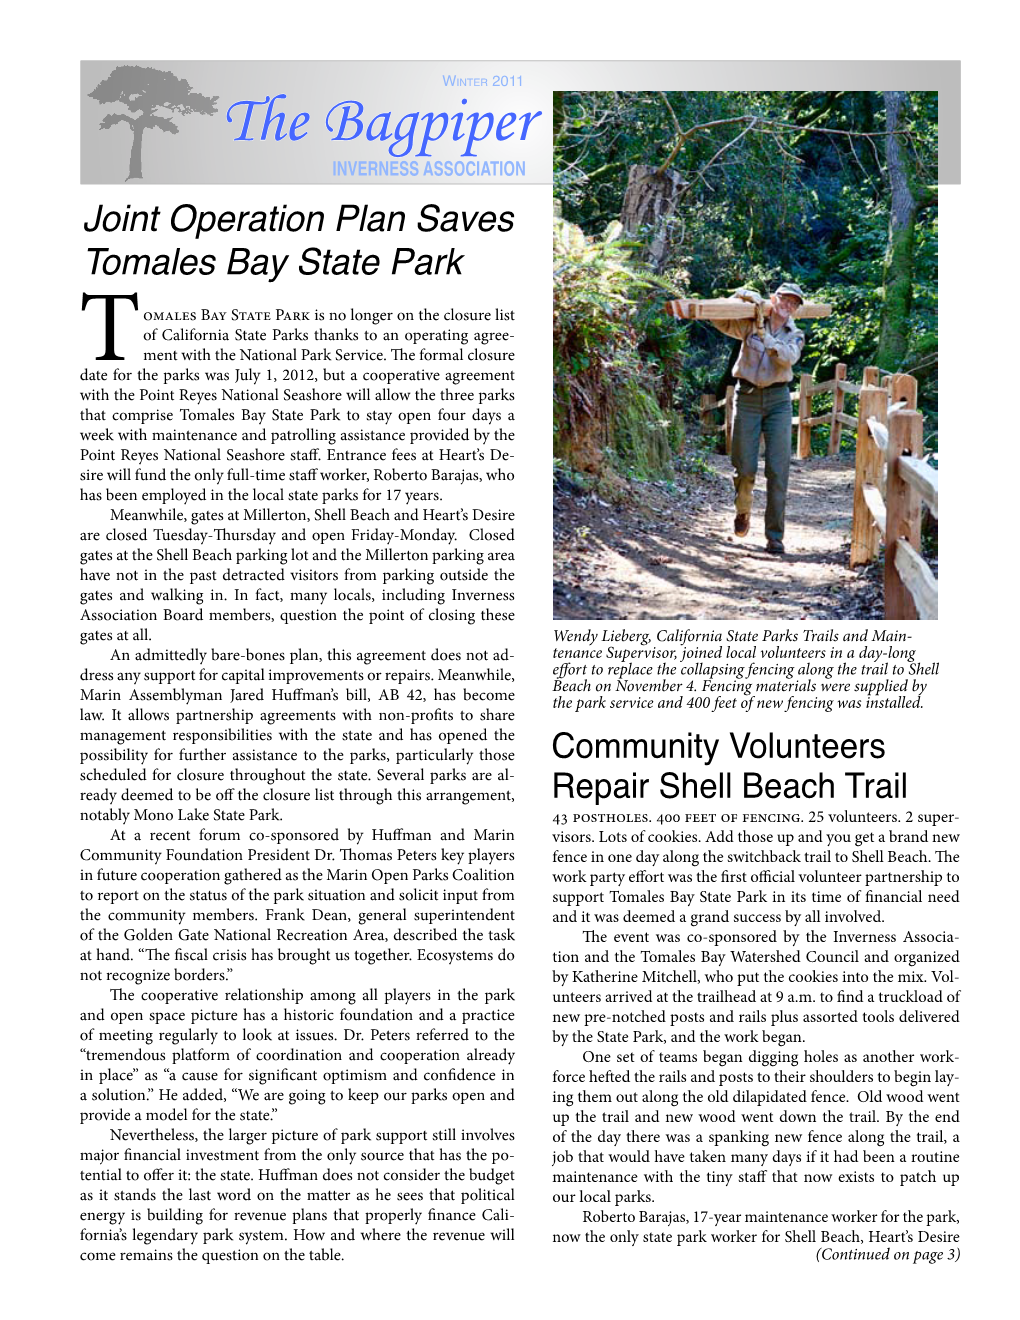 The Bagpiper INVERNESS ASSOCIATION Joint Operation Plan Saves Tomales Bay State Park